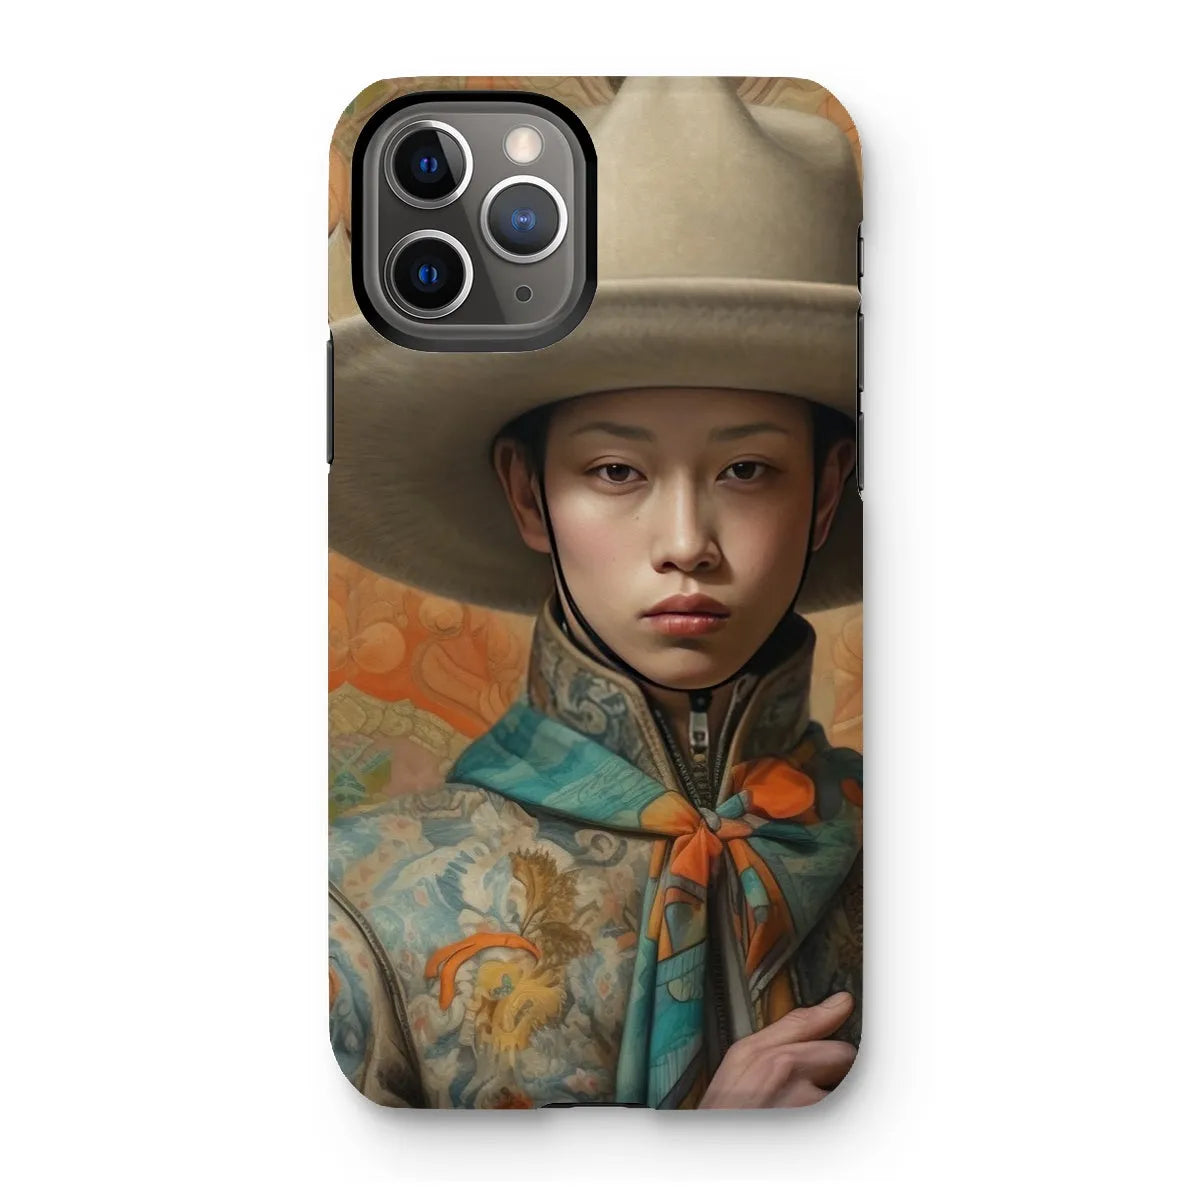 Xiang - Gaysian Chinese Cowboy Aesthetic Art Phone Case - Iphone 11 Pro / Matte - Mobile Phone Cases - Aesthetic Art